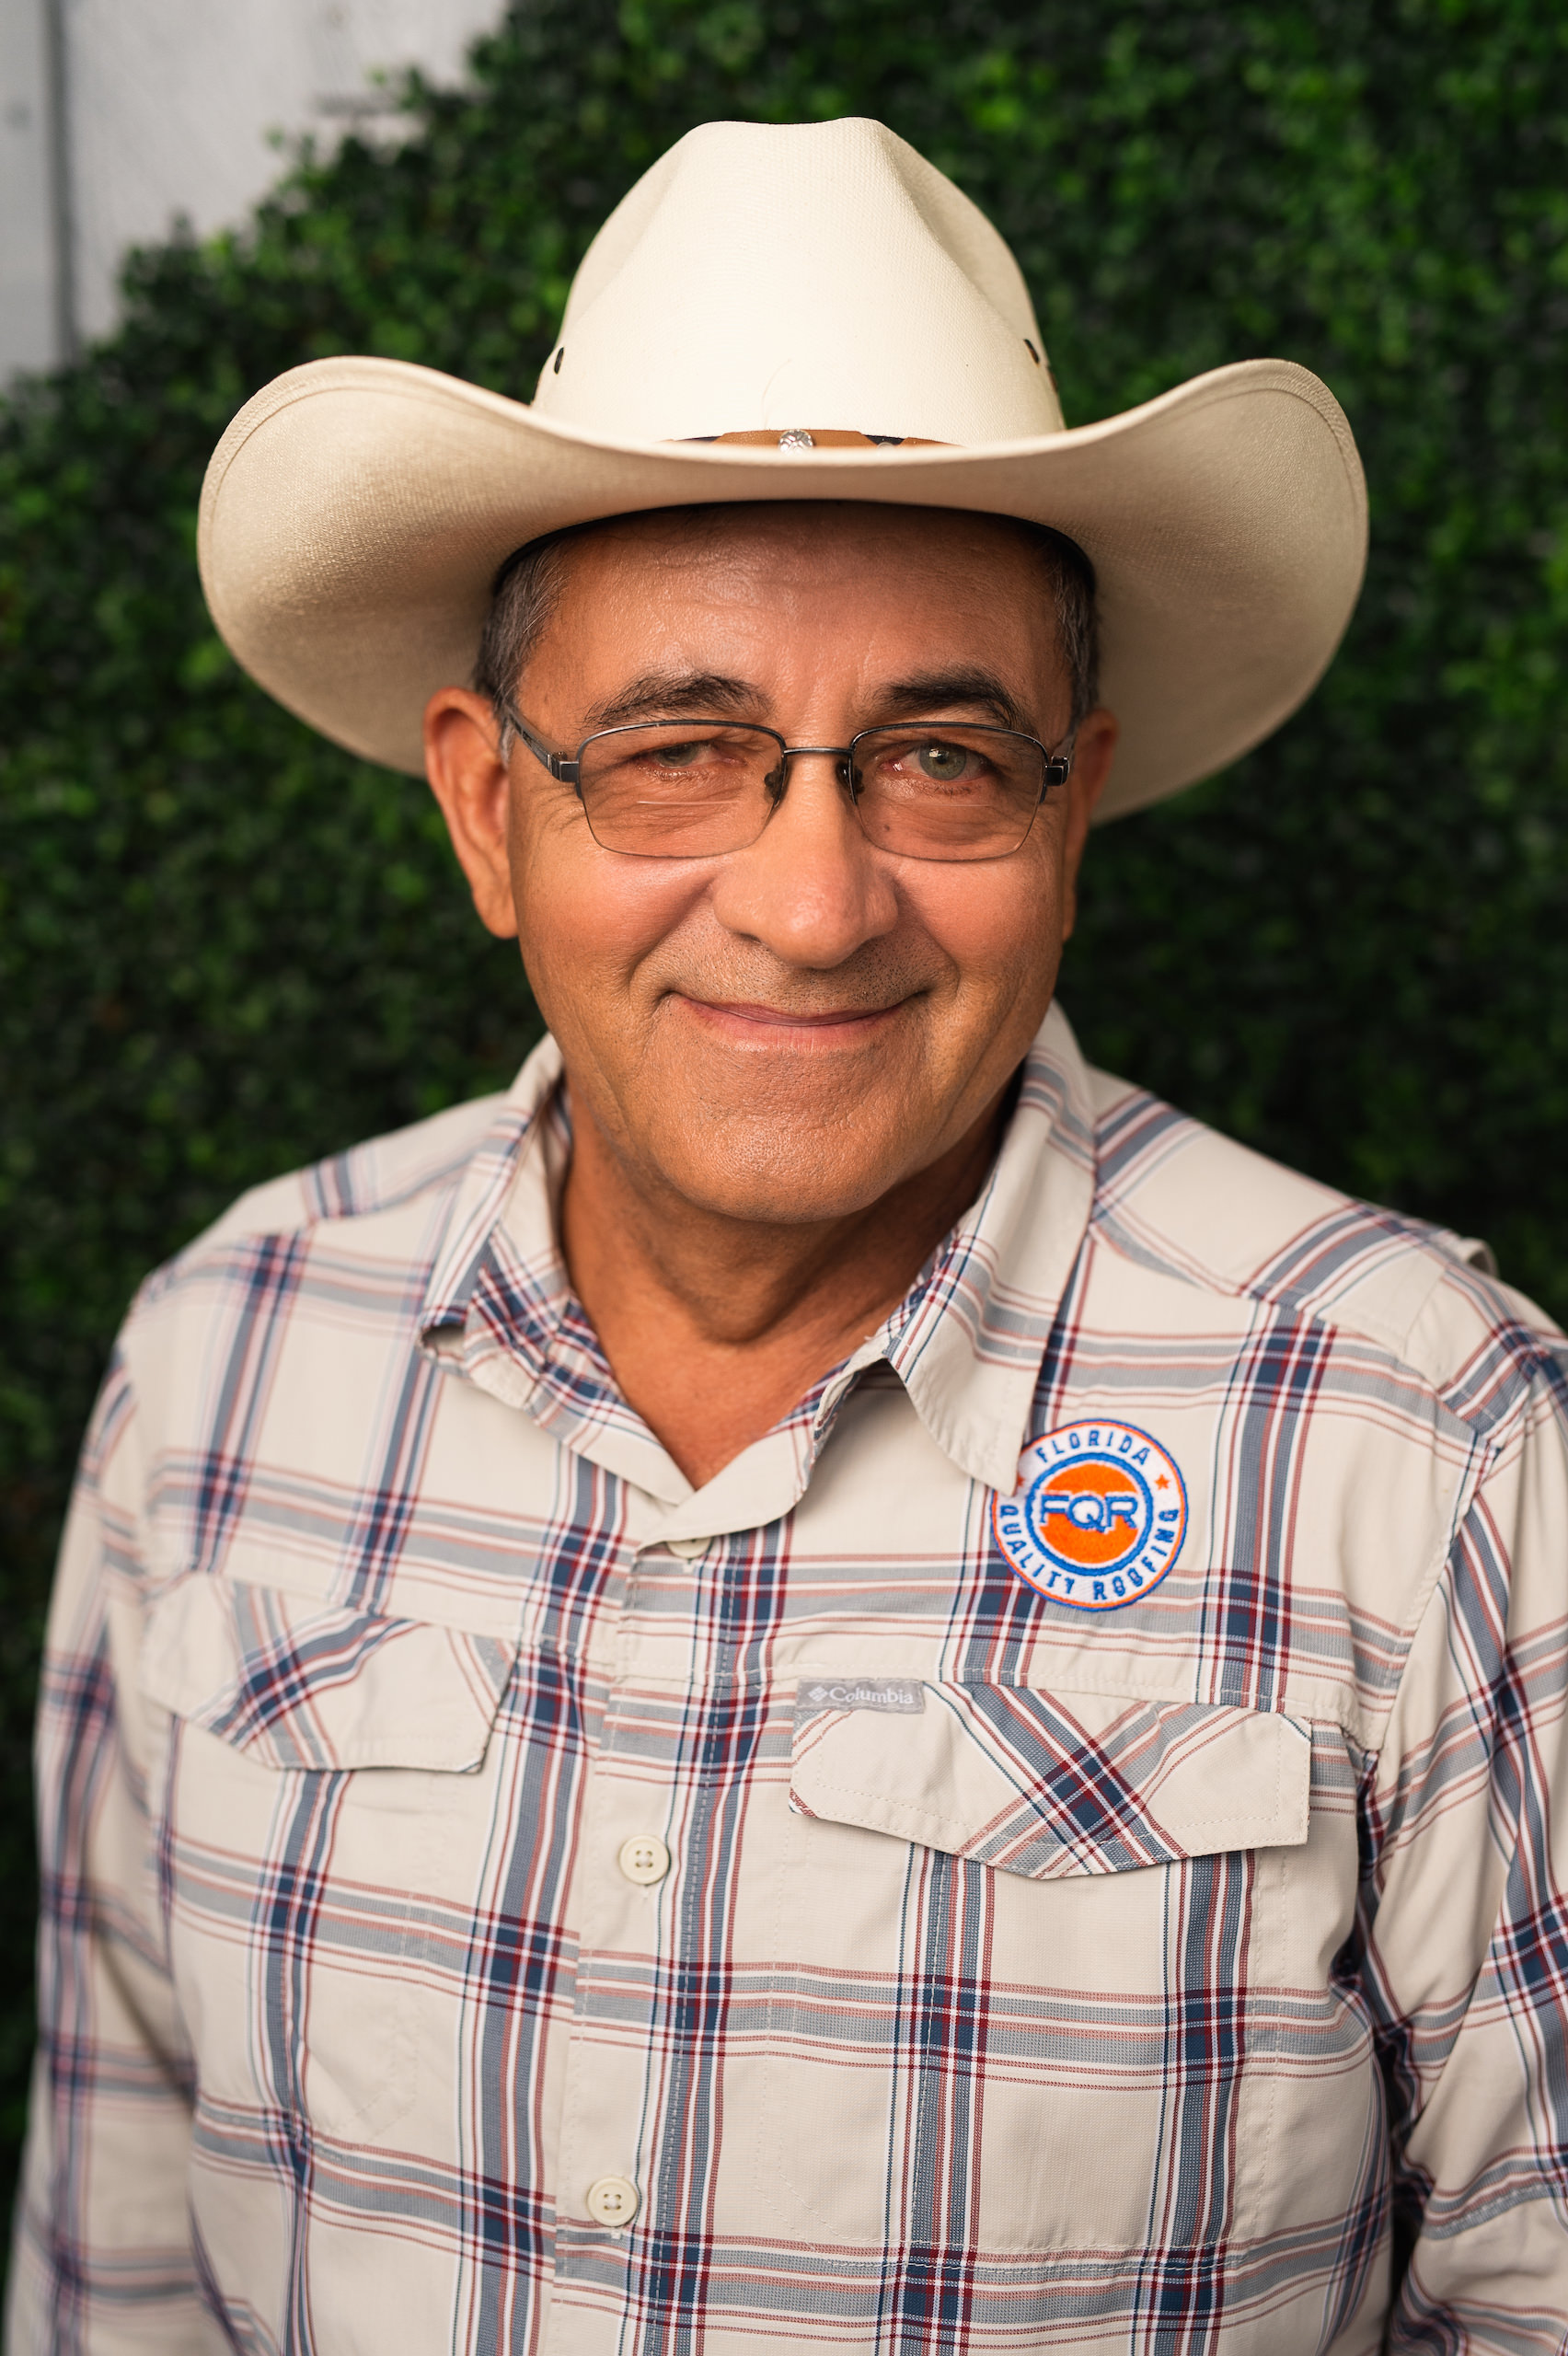 Florida Quality Roofing Headshot of man wearing cowboy hat and glasses in a mostly white shirt with FQR logo